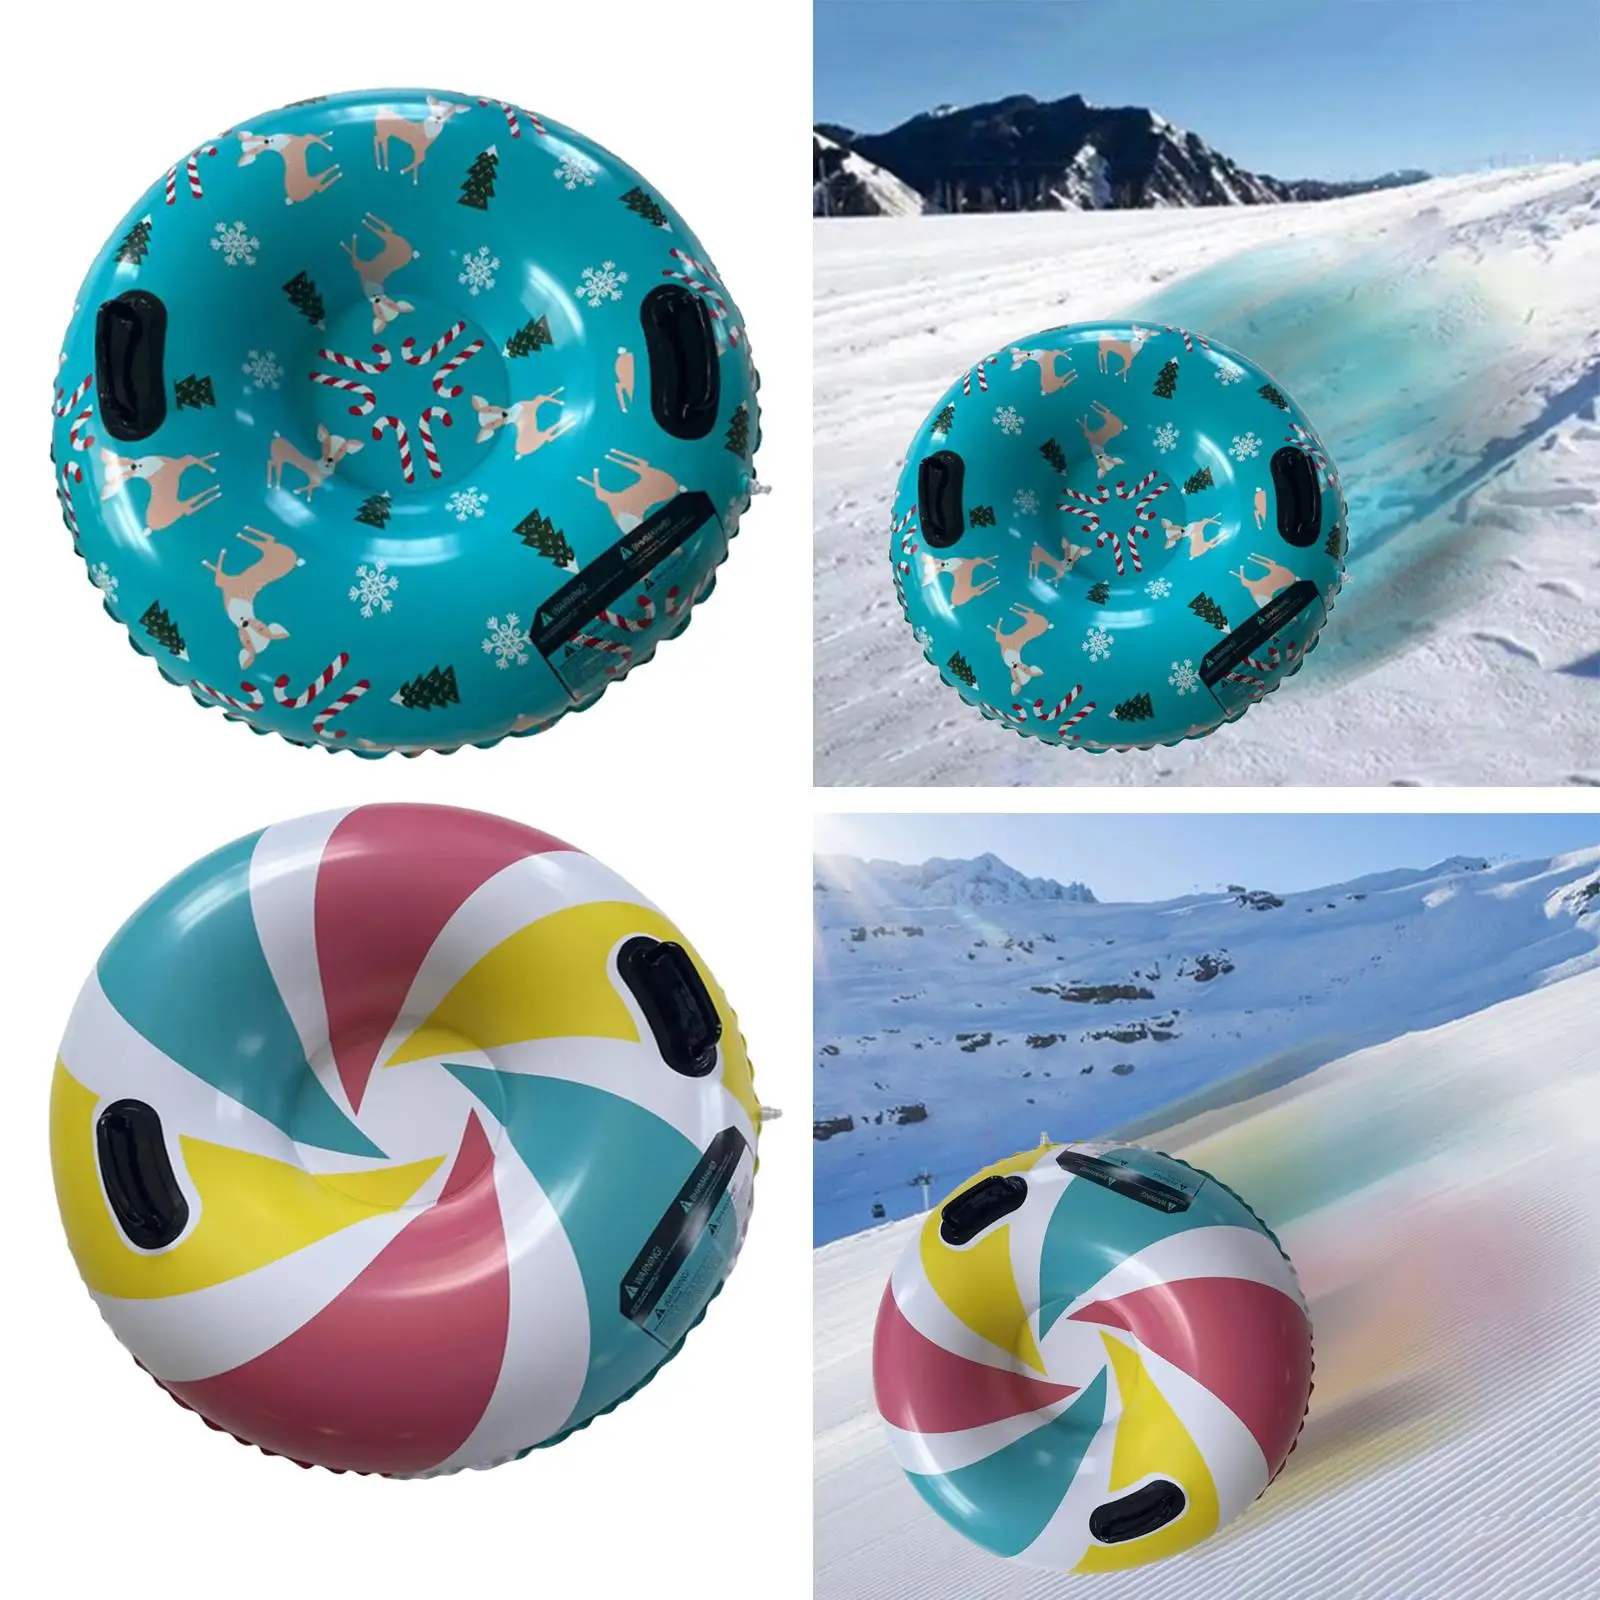 91cm Foldable Winter Snow Tube Easy To Carry With Handle With Thick Bottom